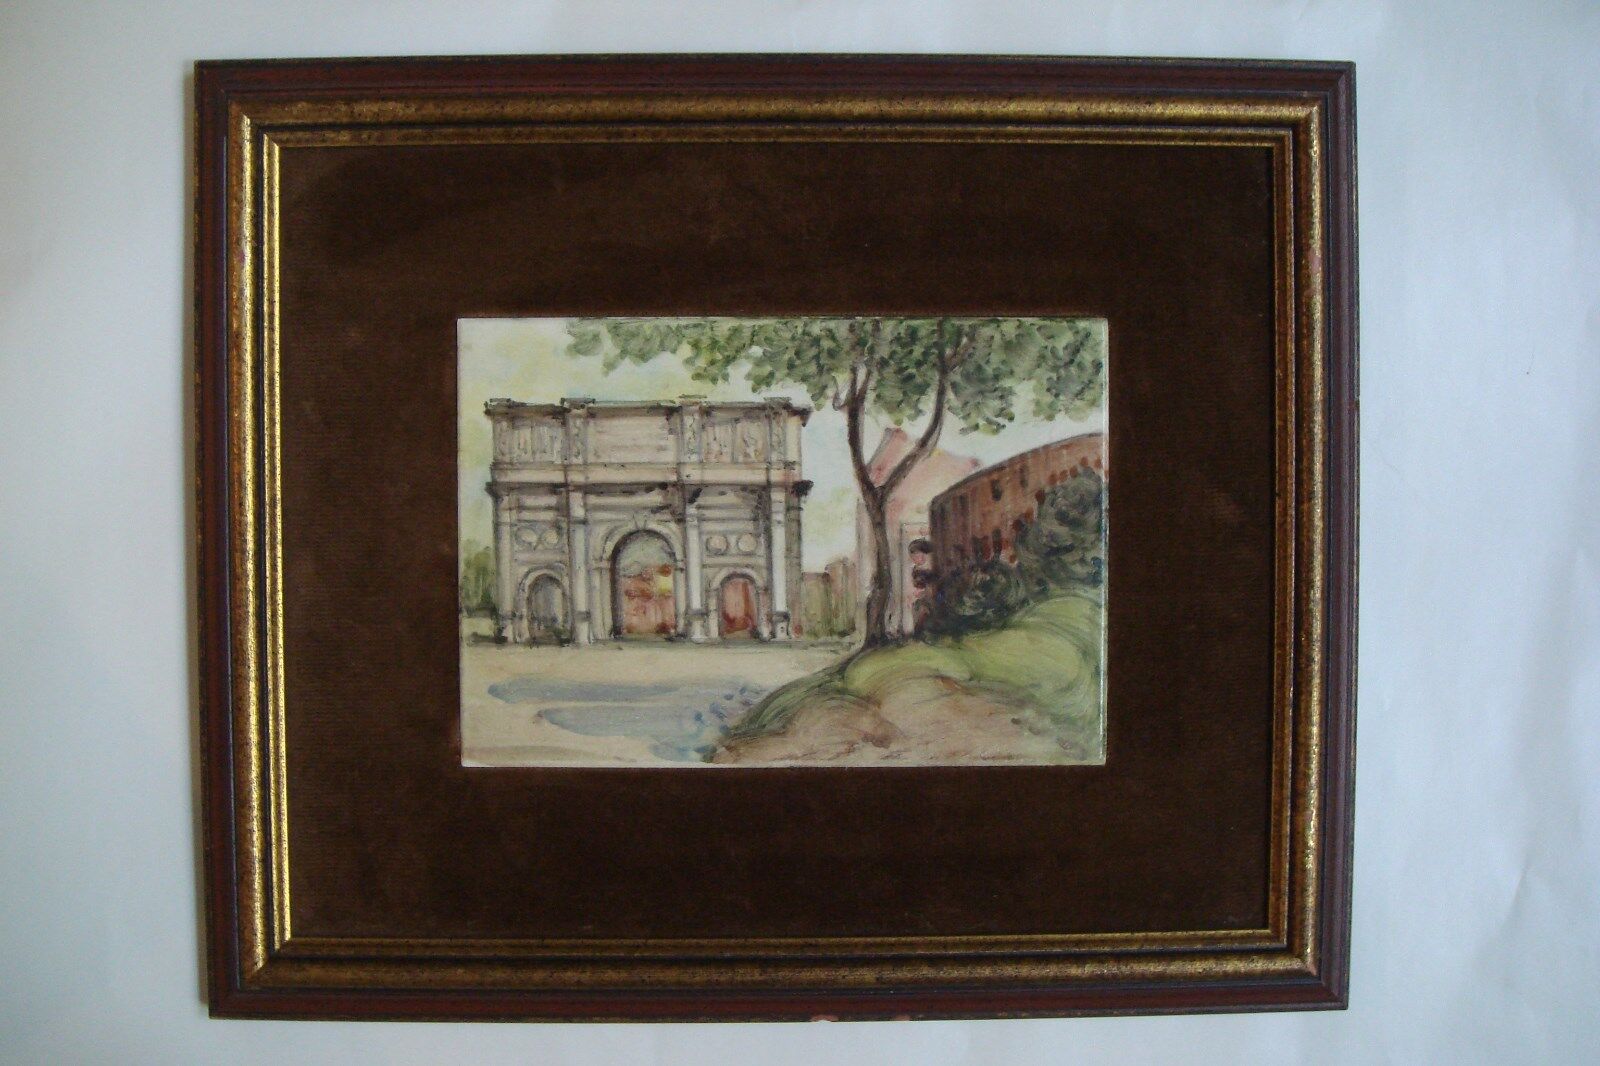 ARCH OF SEPTIMIUS SEVERUS - VINTAGE HAND PAINTED TILE - FRAMED 